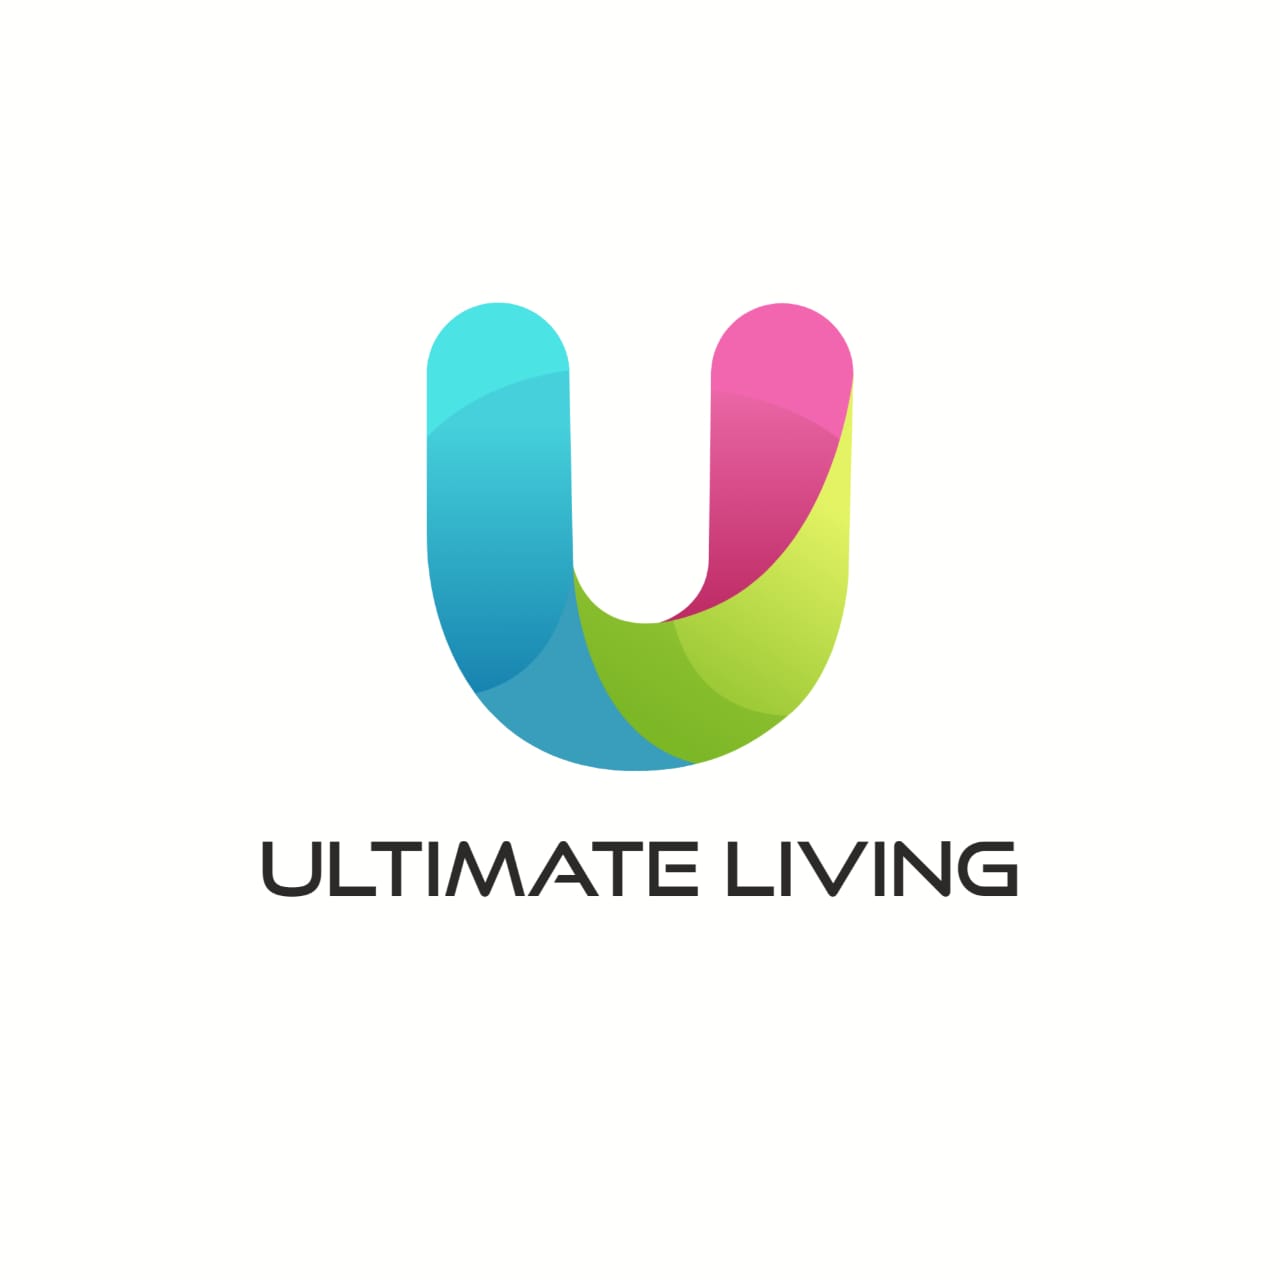 ULTIMATE LIVING